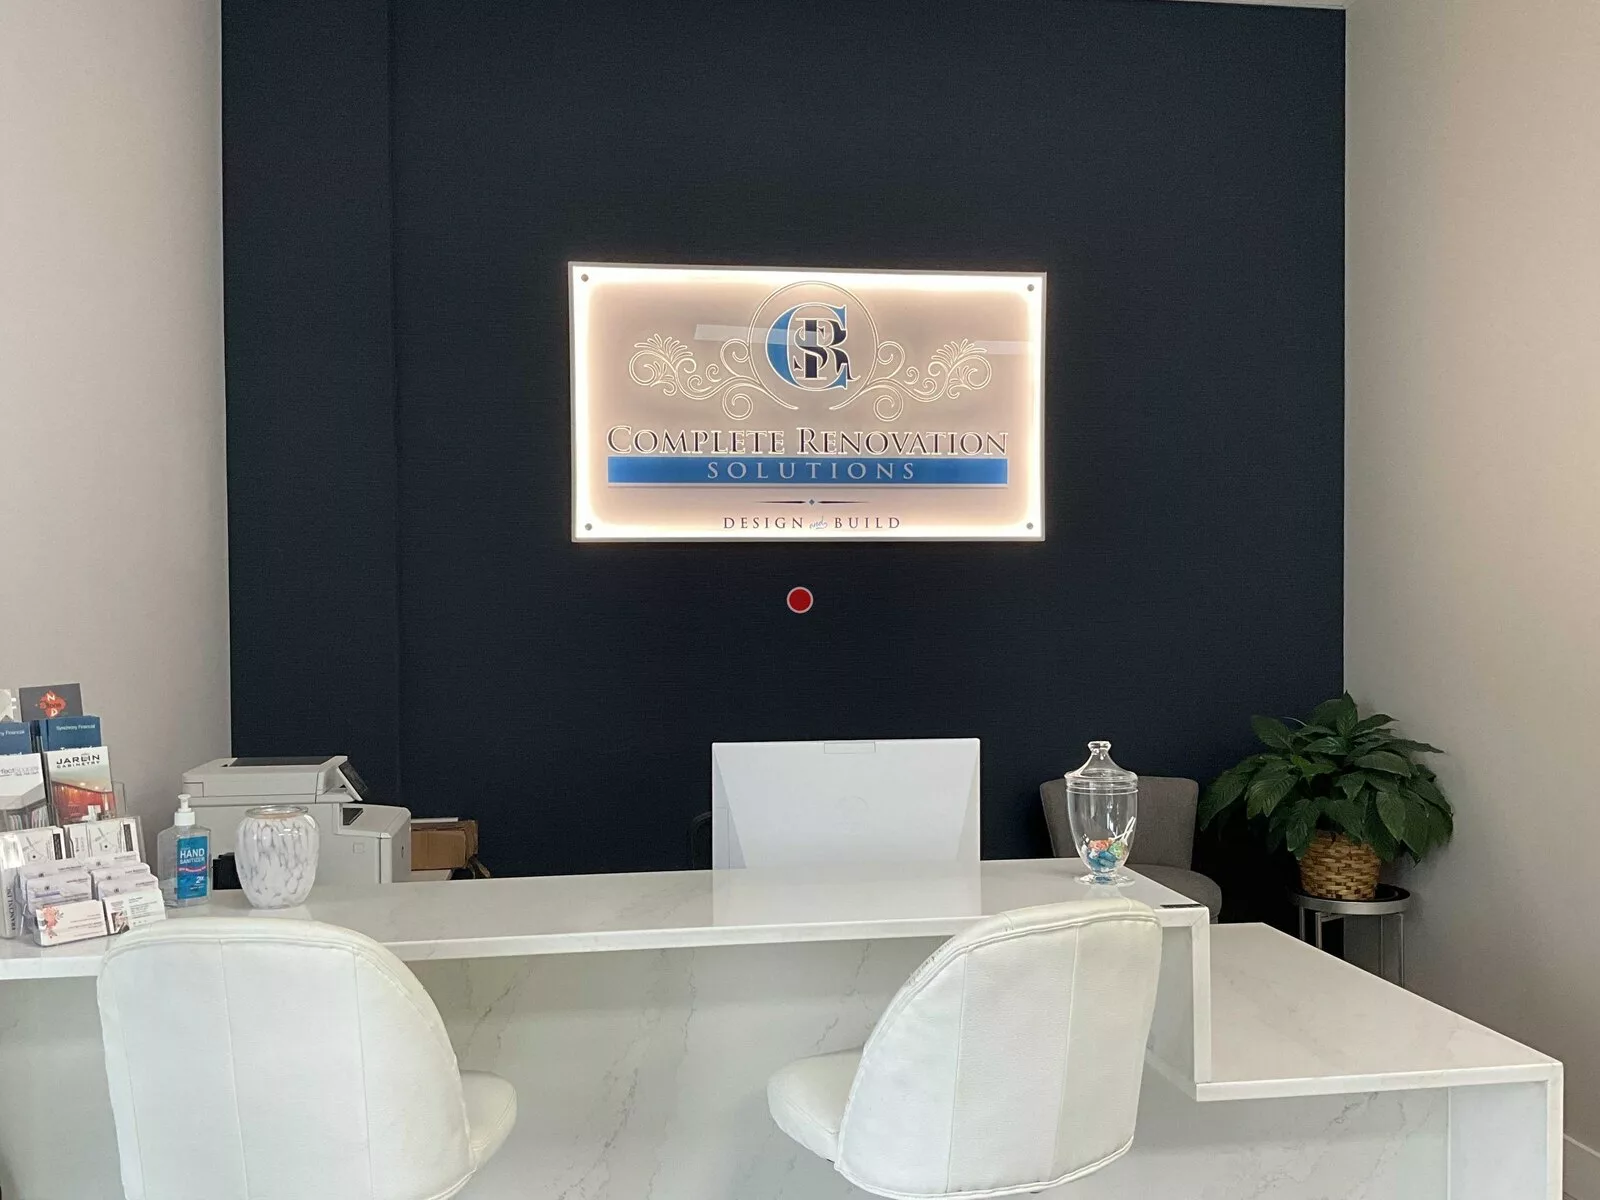 Complete Renovation Solutions Edge Lit Cabinet Lobby Sign